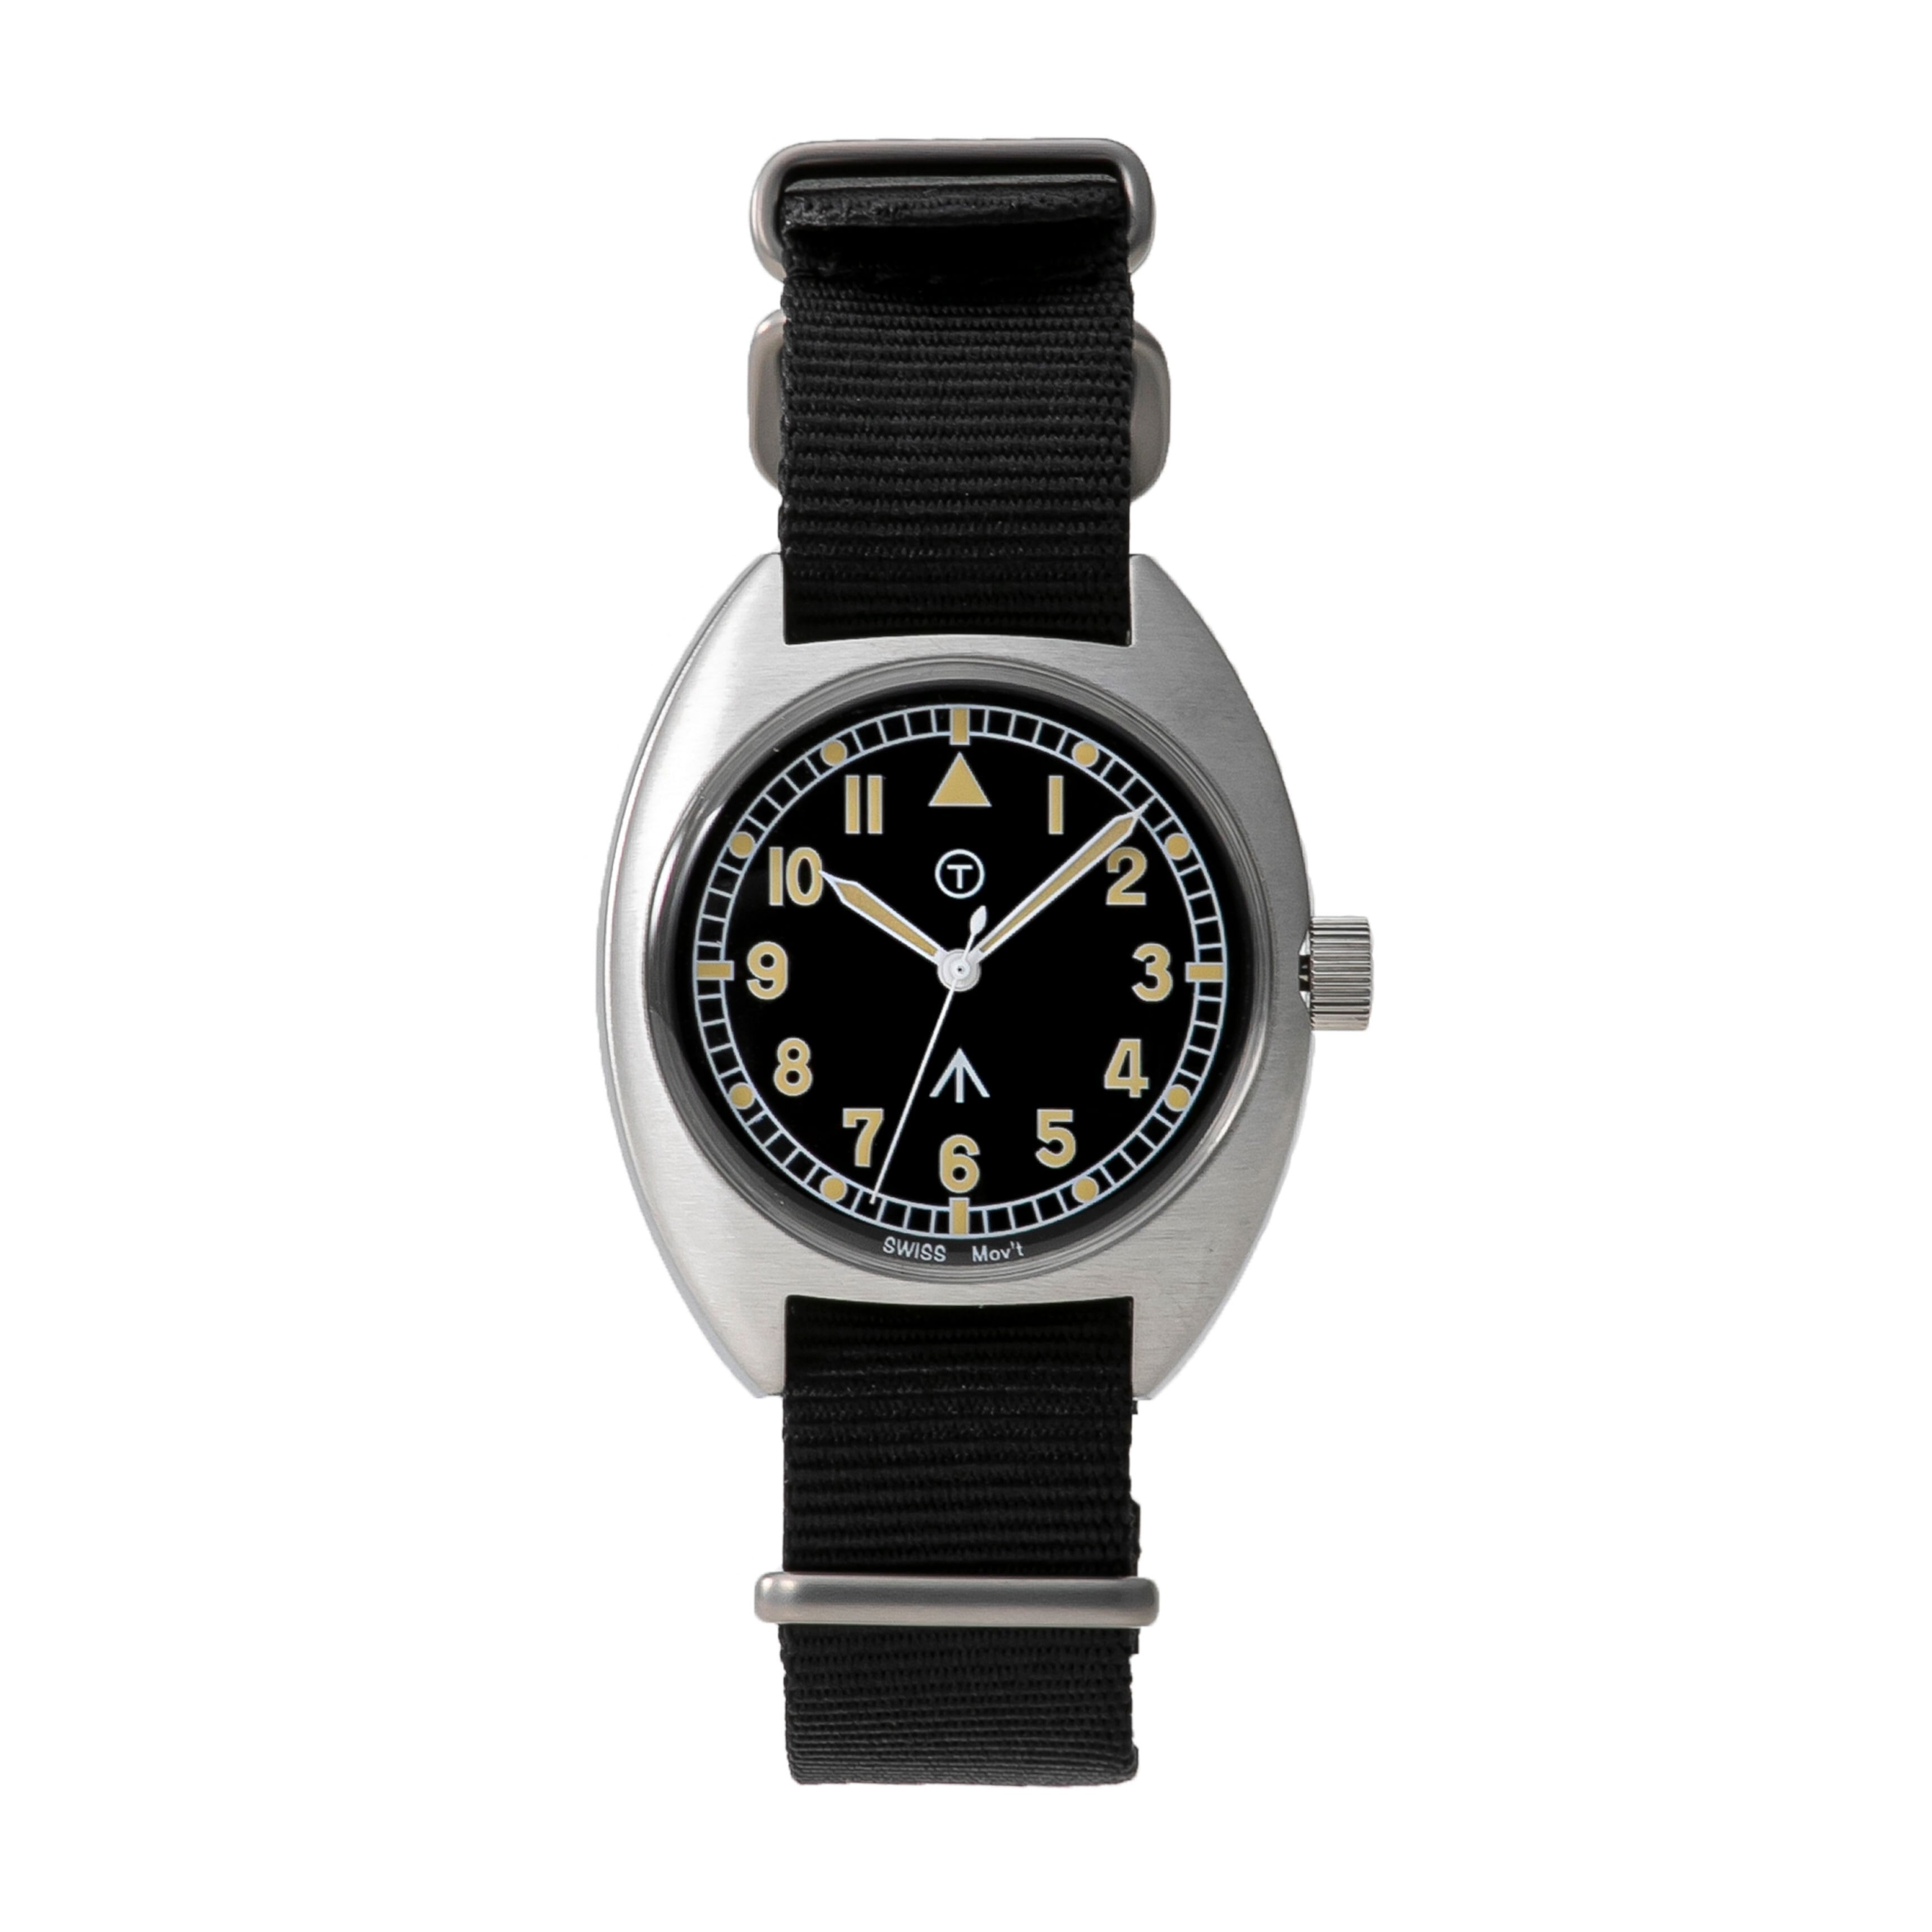 Naval military watch Mil.-02B Royal Air Force type | Naval Watch Swiss  powered by BASE